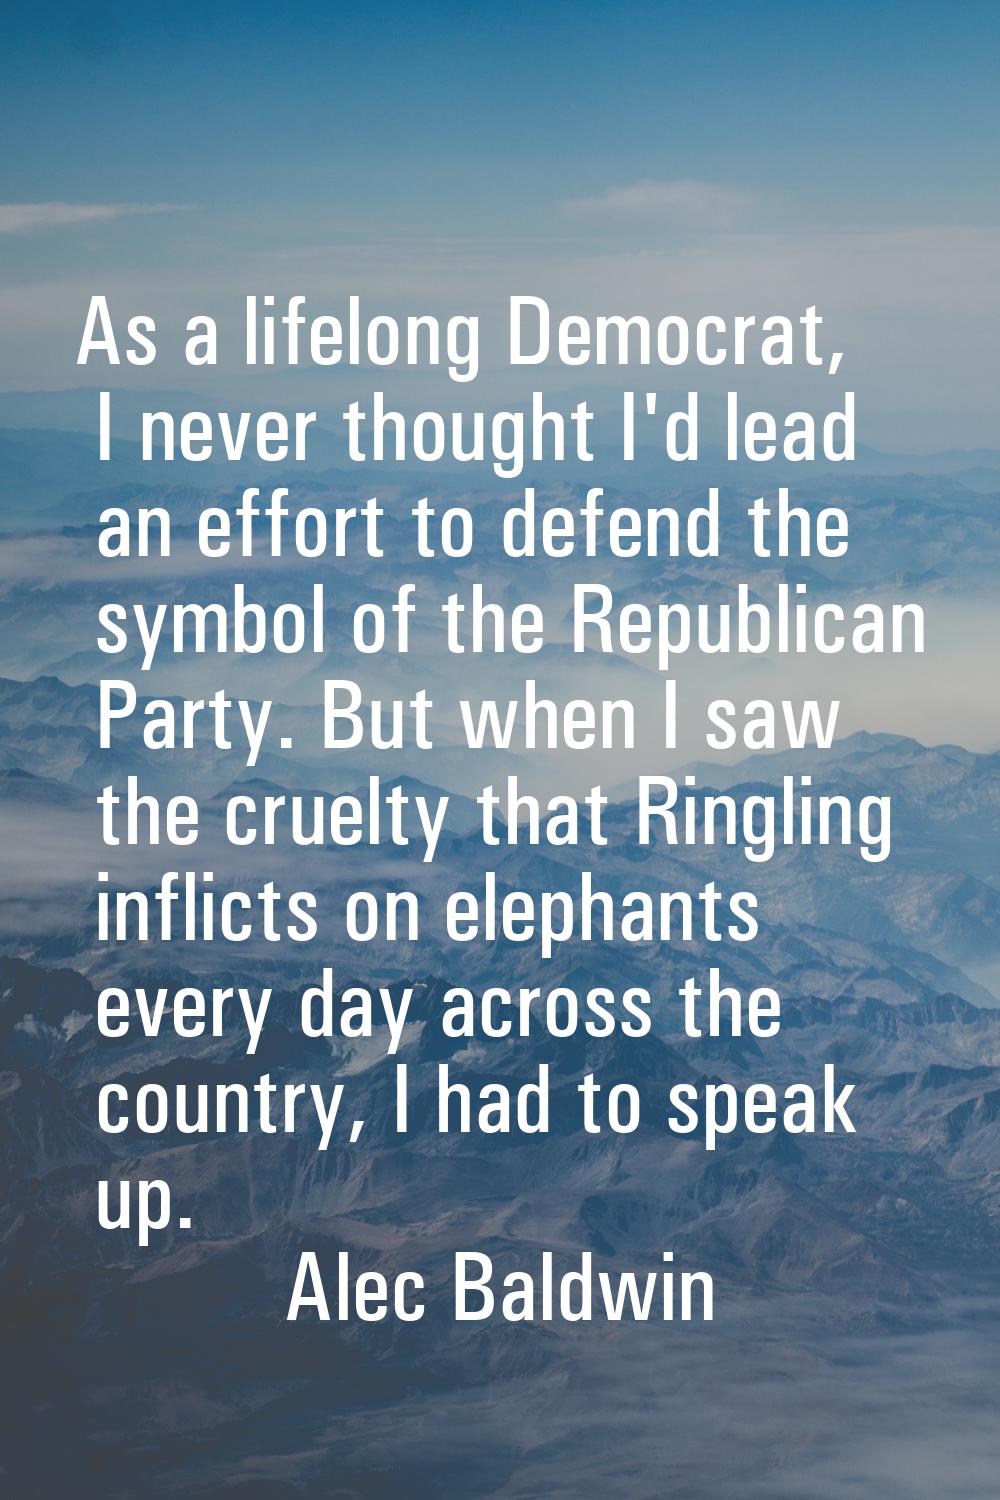 As a lifelong Democrat, I never thought I'd lead an effort to defend the symbol of the Republican P